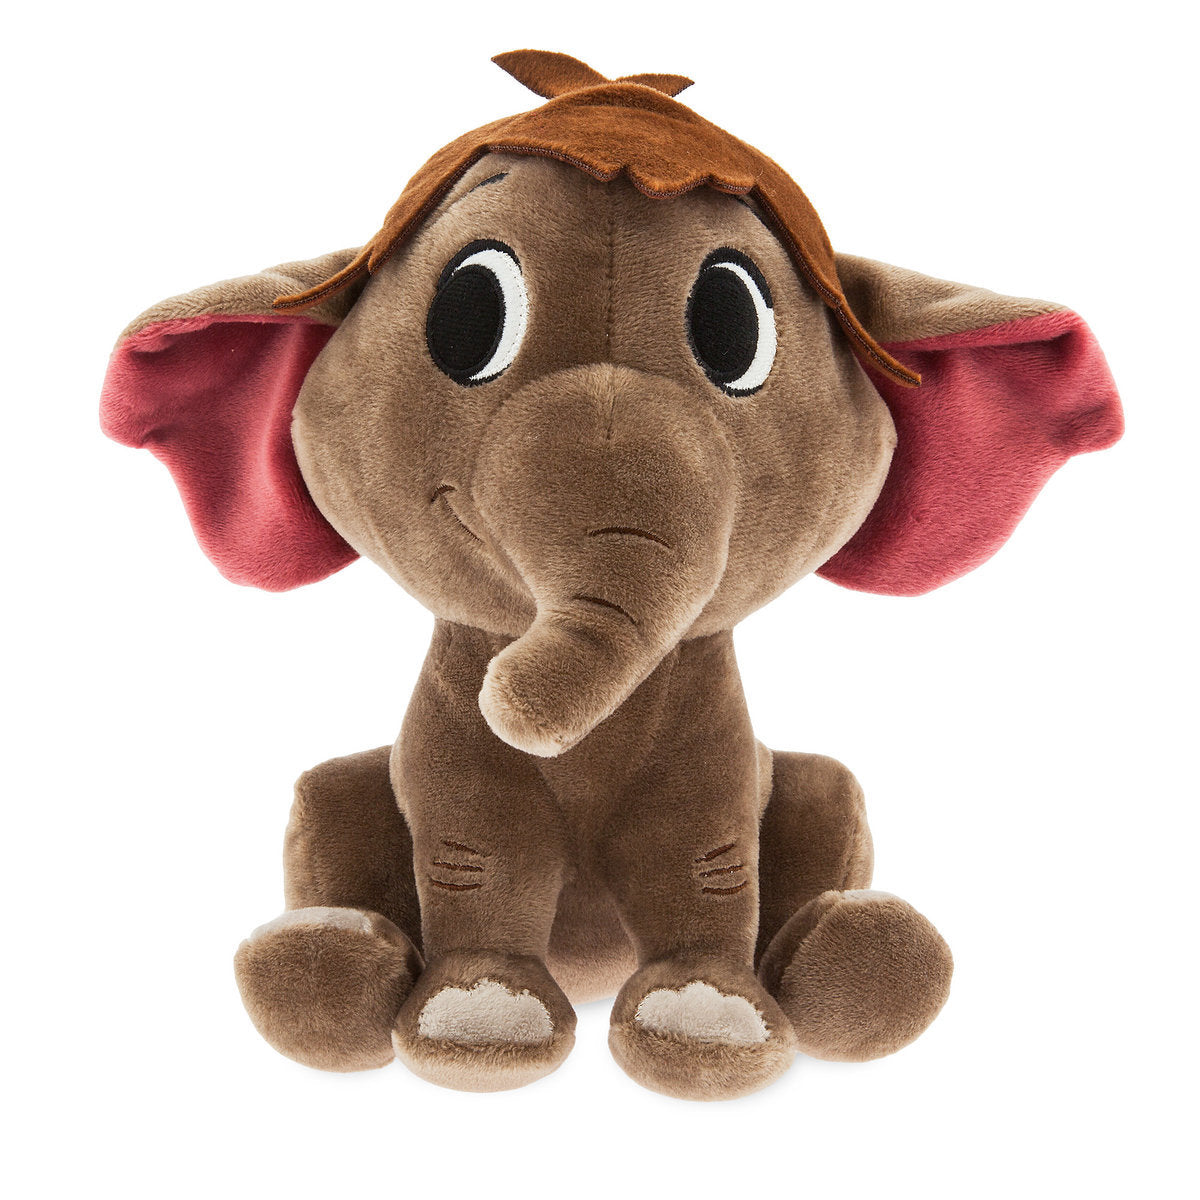 Disney Furrytale The Jungle Book Hathi Jr. Small Plush New with Tags